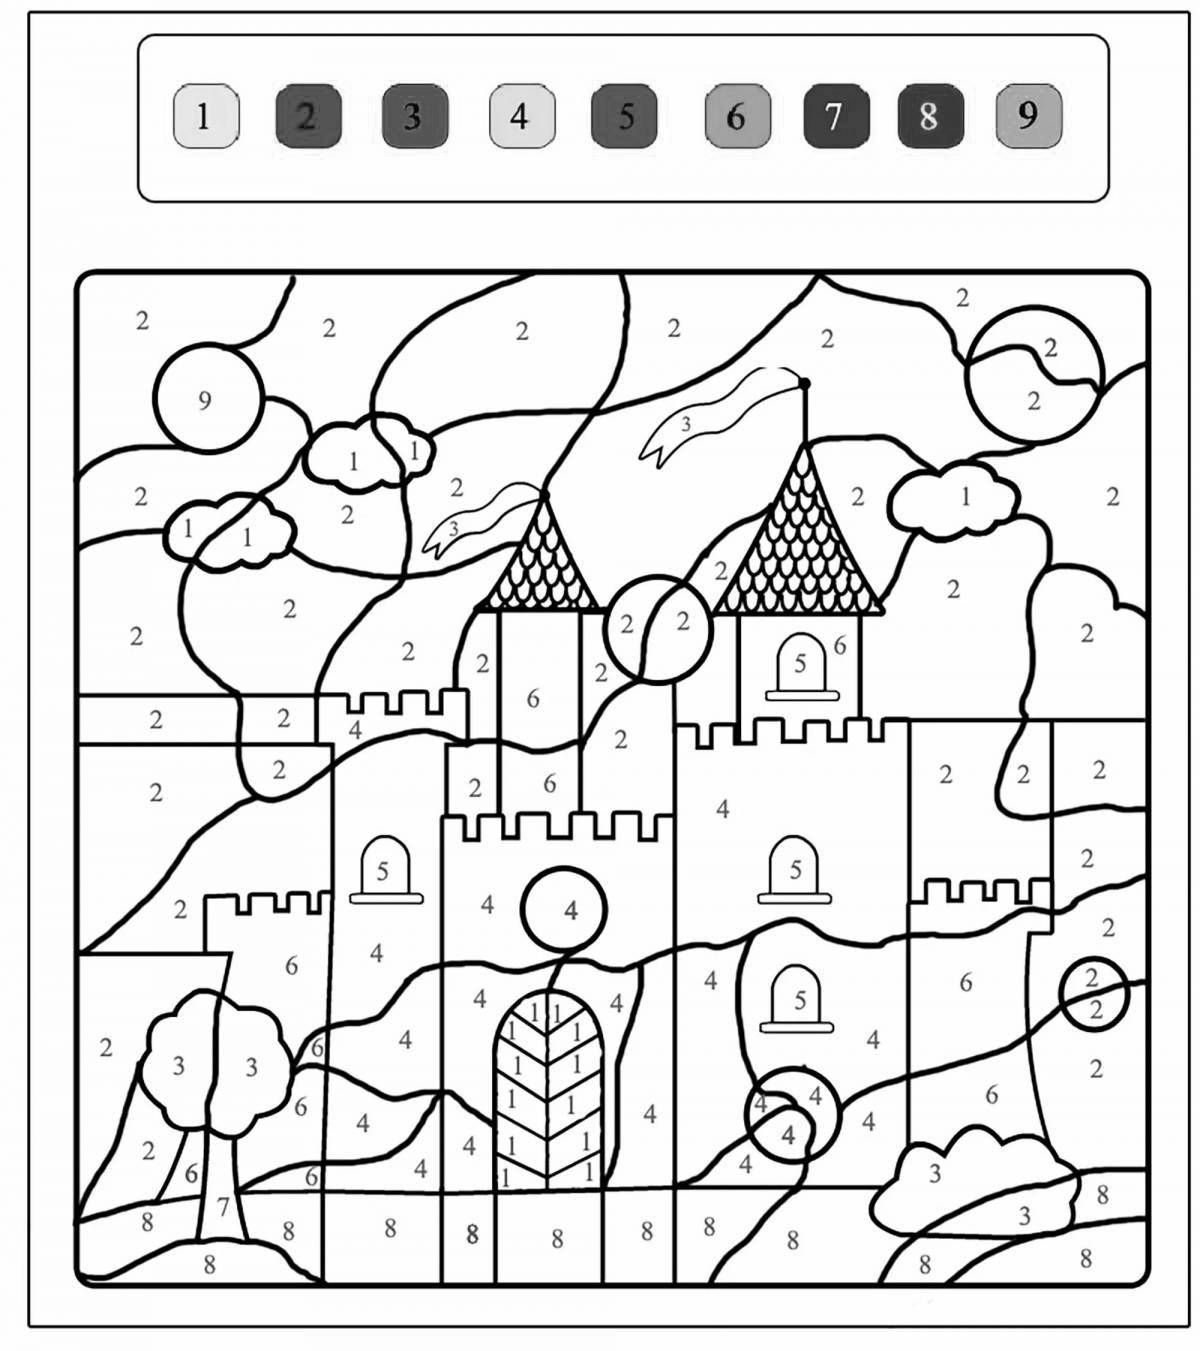 Game hey color by numbers #9